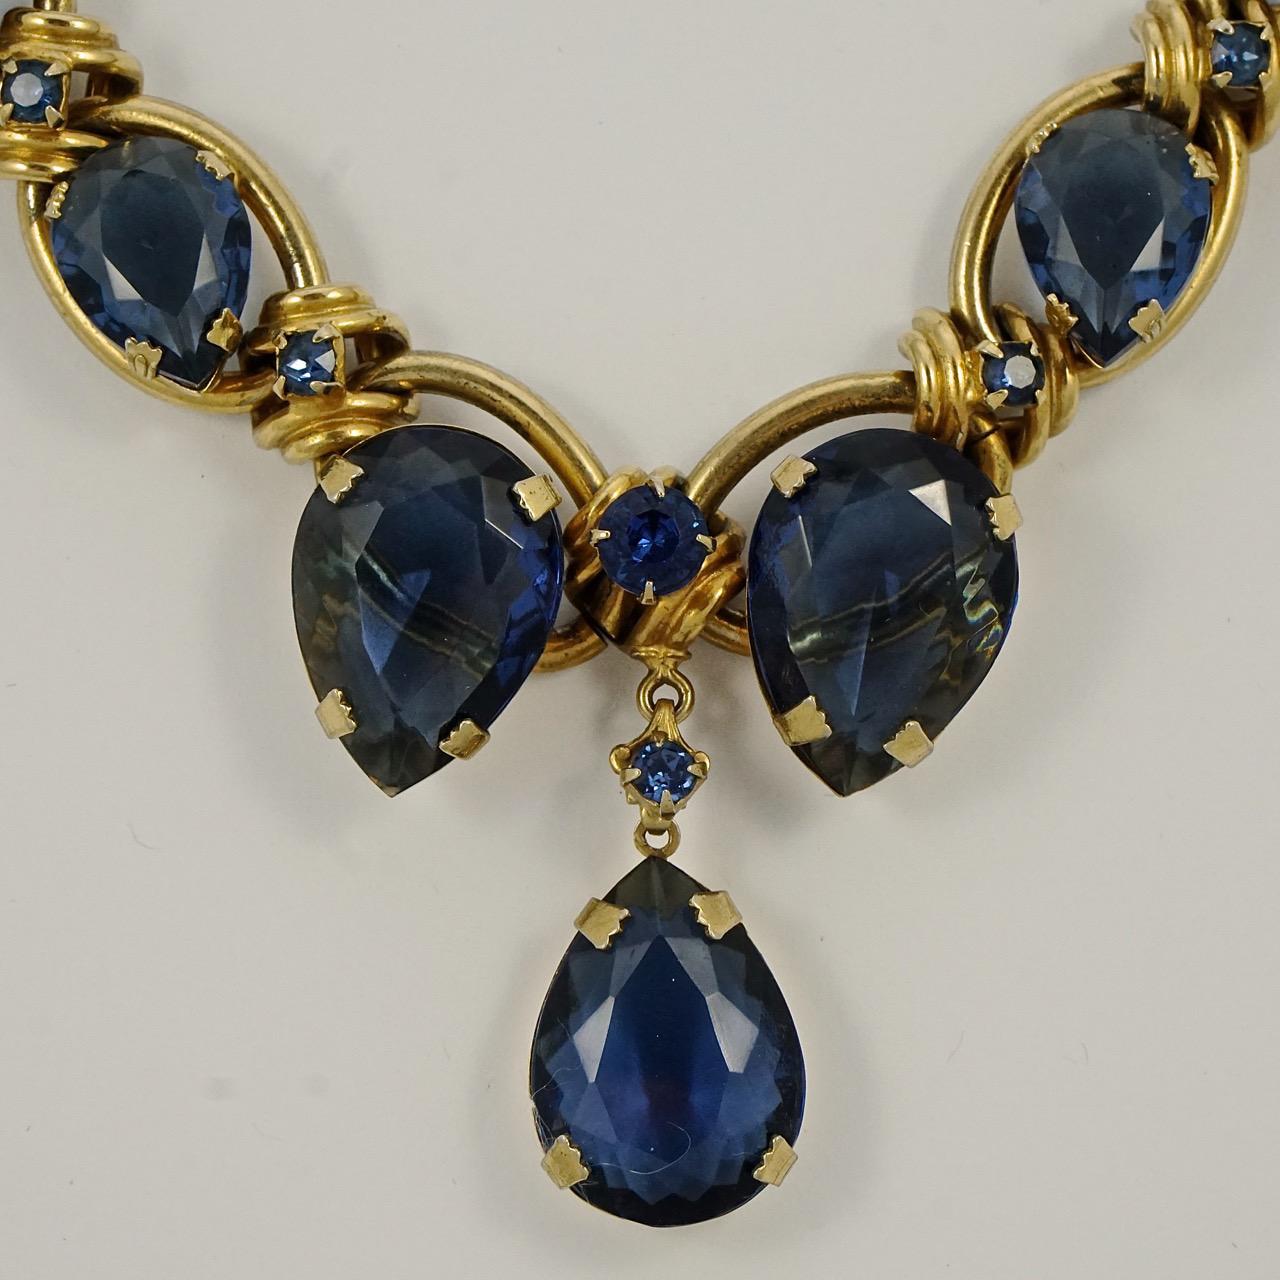 Fabulous gold tone and blue tear drop necklace, featuring seven tear drops. The large tear drops each measure length 2.5cm / .98 inch. The necklace is length 46cm / 18 inches, which is adjustable, and the width of the links is 1.75cm / .68 inch. The